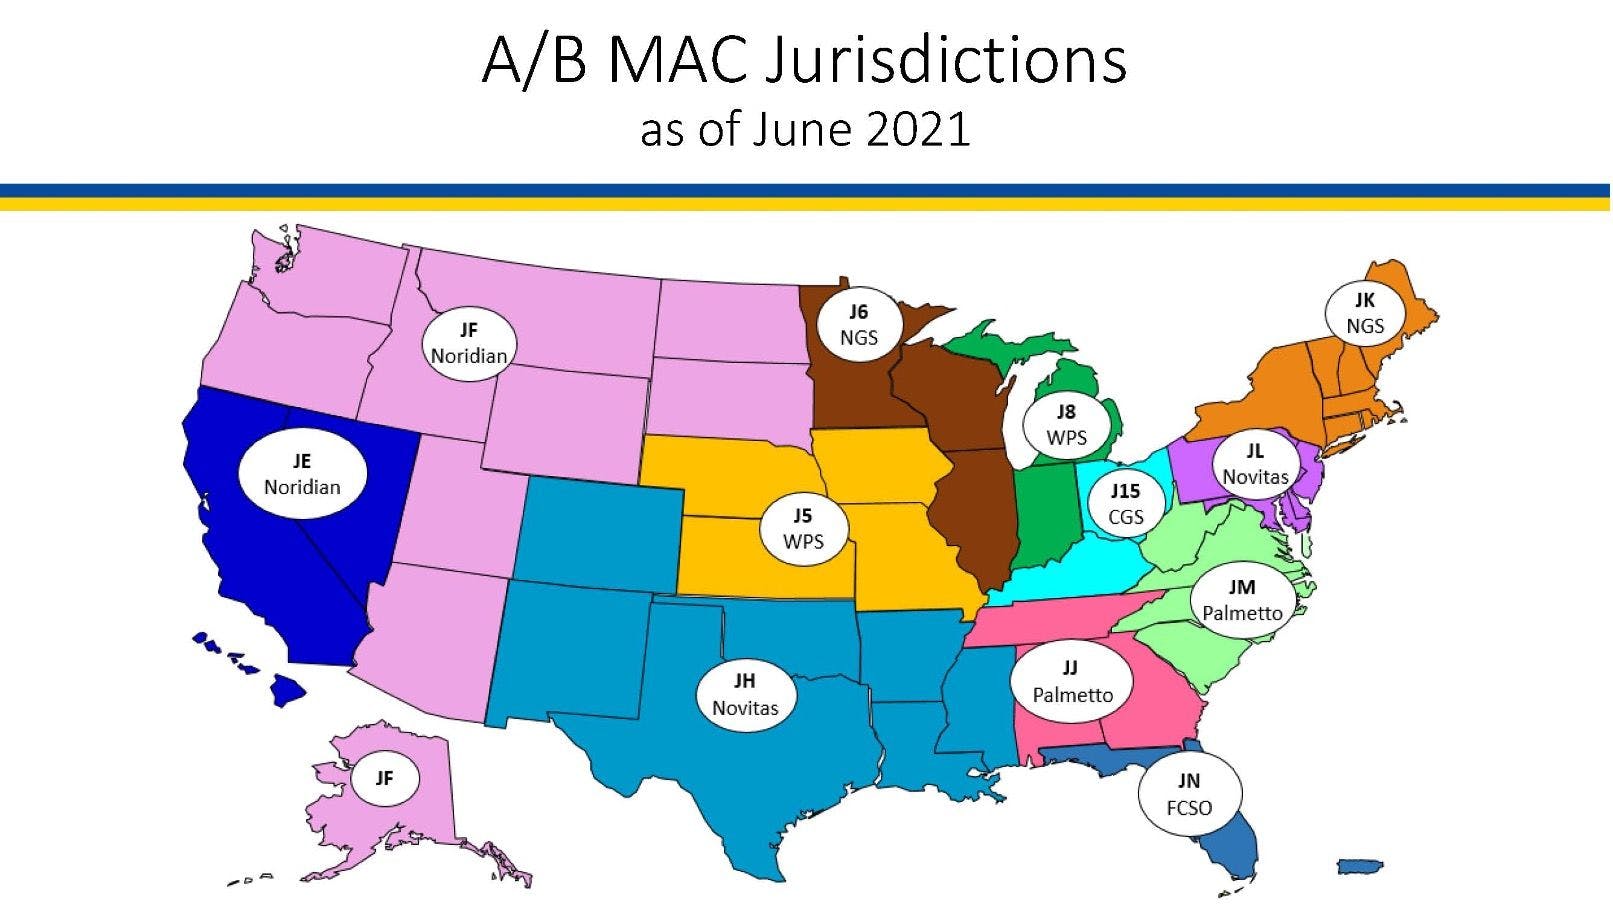 Seven MACs process Medicare claims across the country. This article is primarily about NGS, which covers the J6 and JL regions, shown on the map in brown and orange. (Chart courtesy of Cynthia Matossian, MD, FACS, ABES)